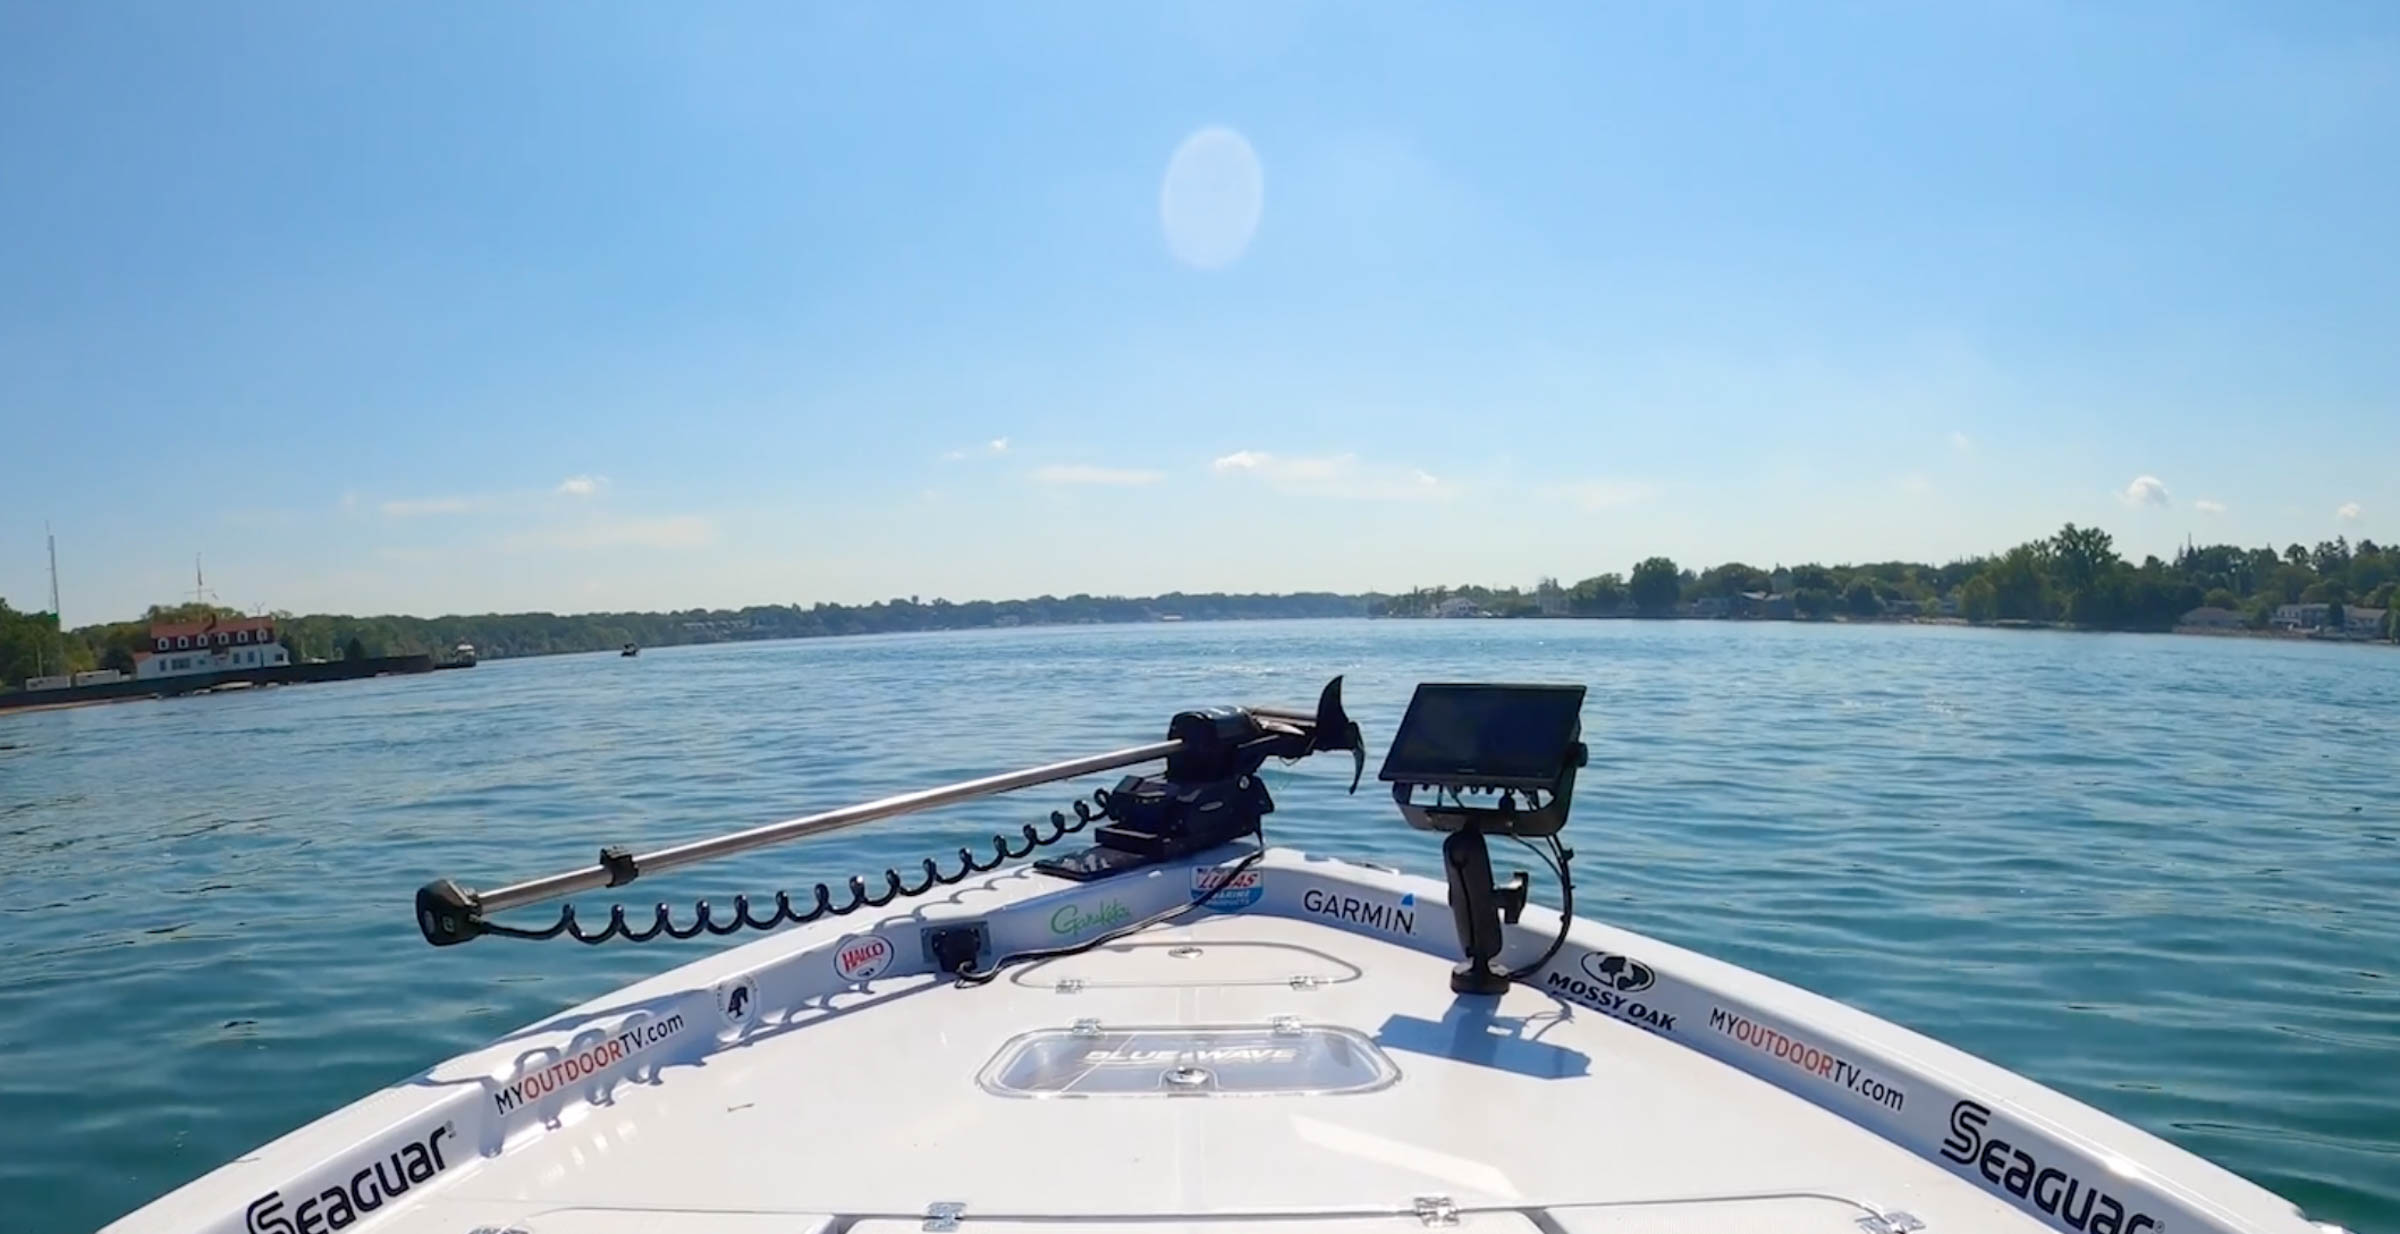 TROLLING MOTOR on a BIG BOAT, GAME CHANGING *TECHNOLOGY*